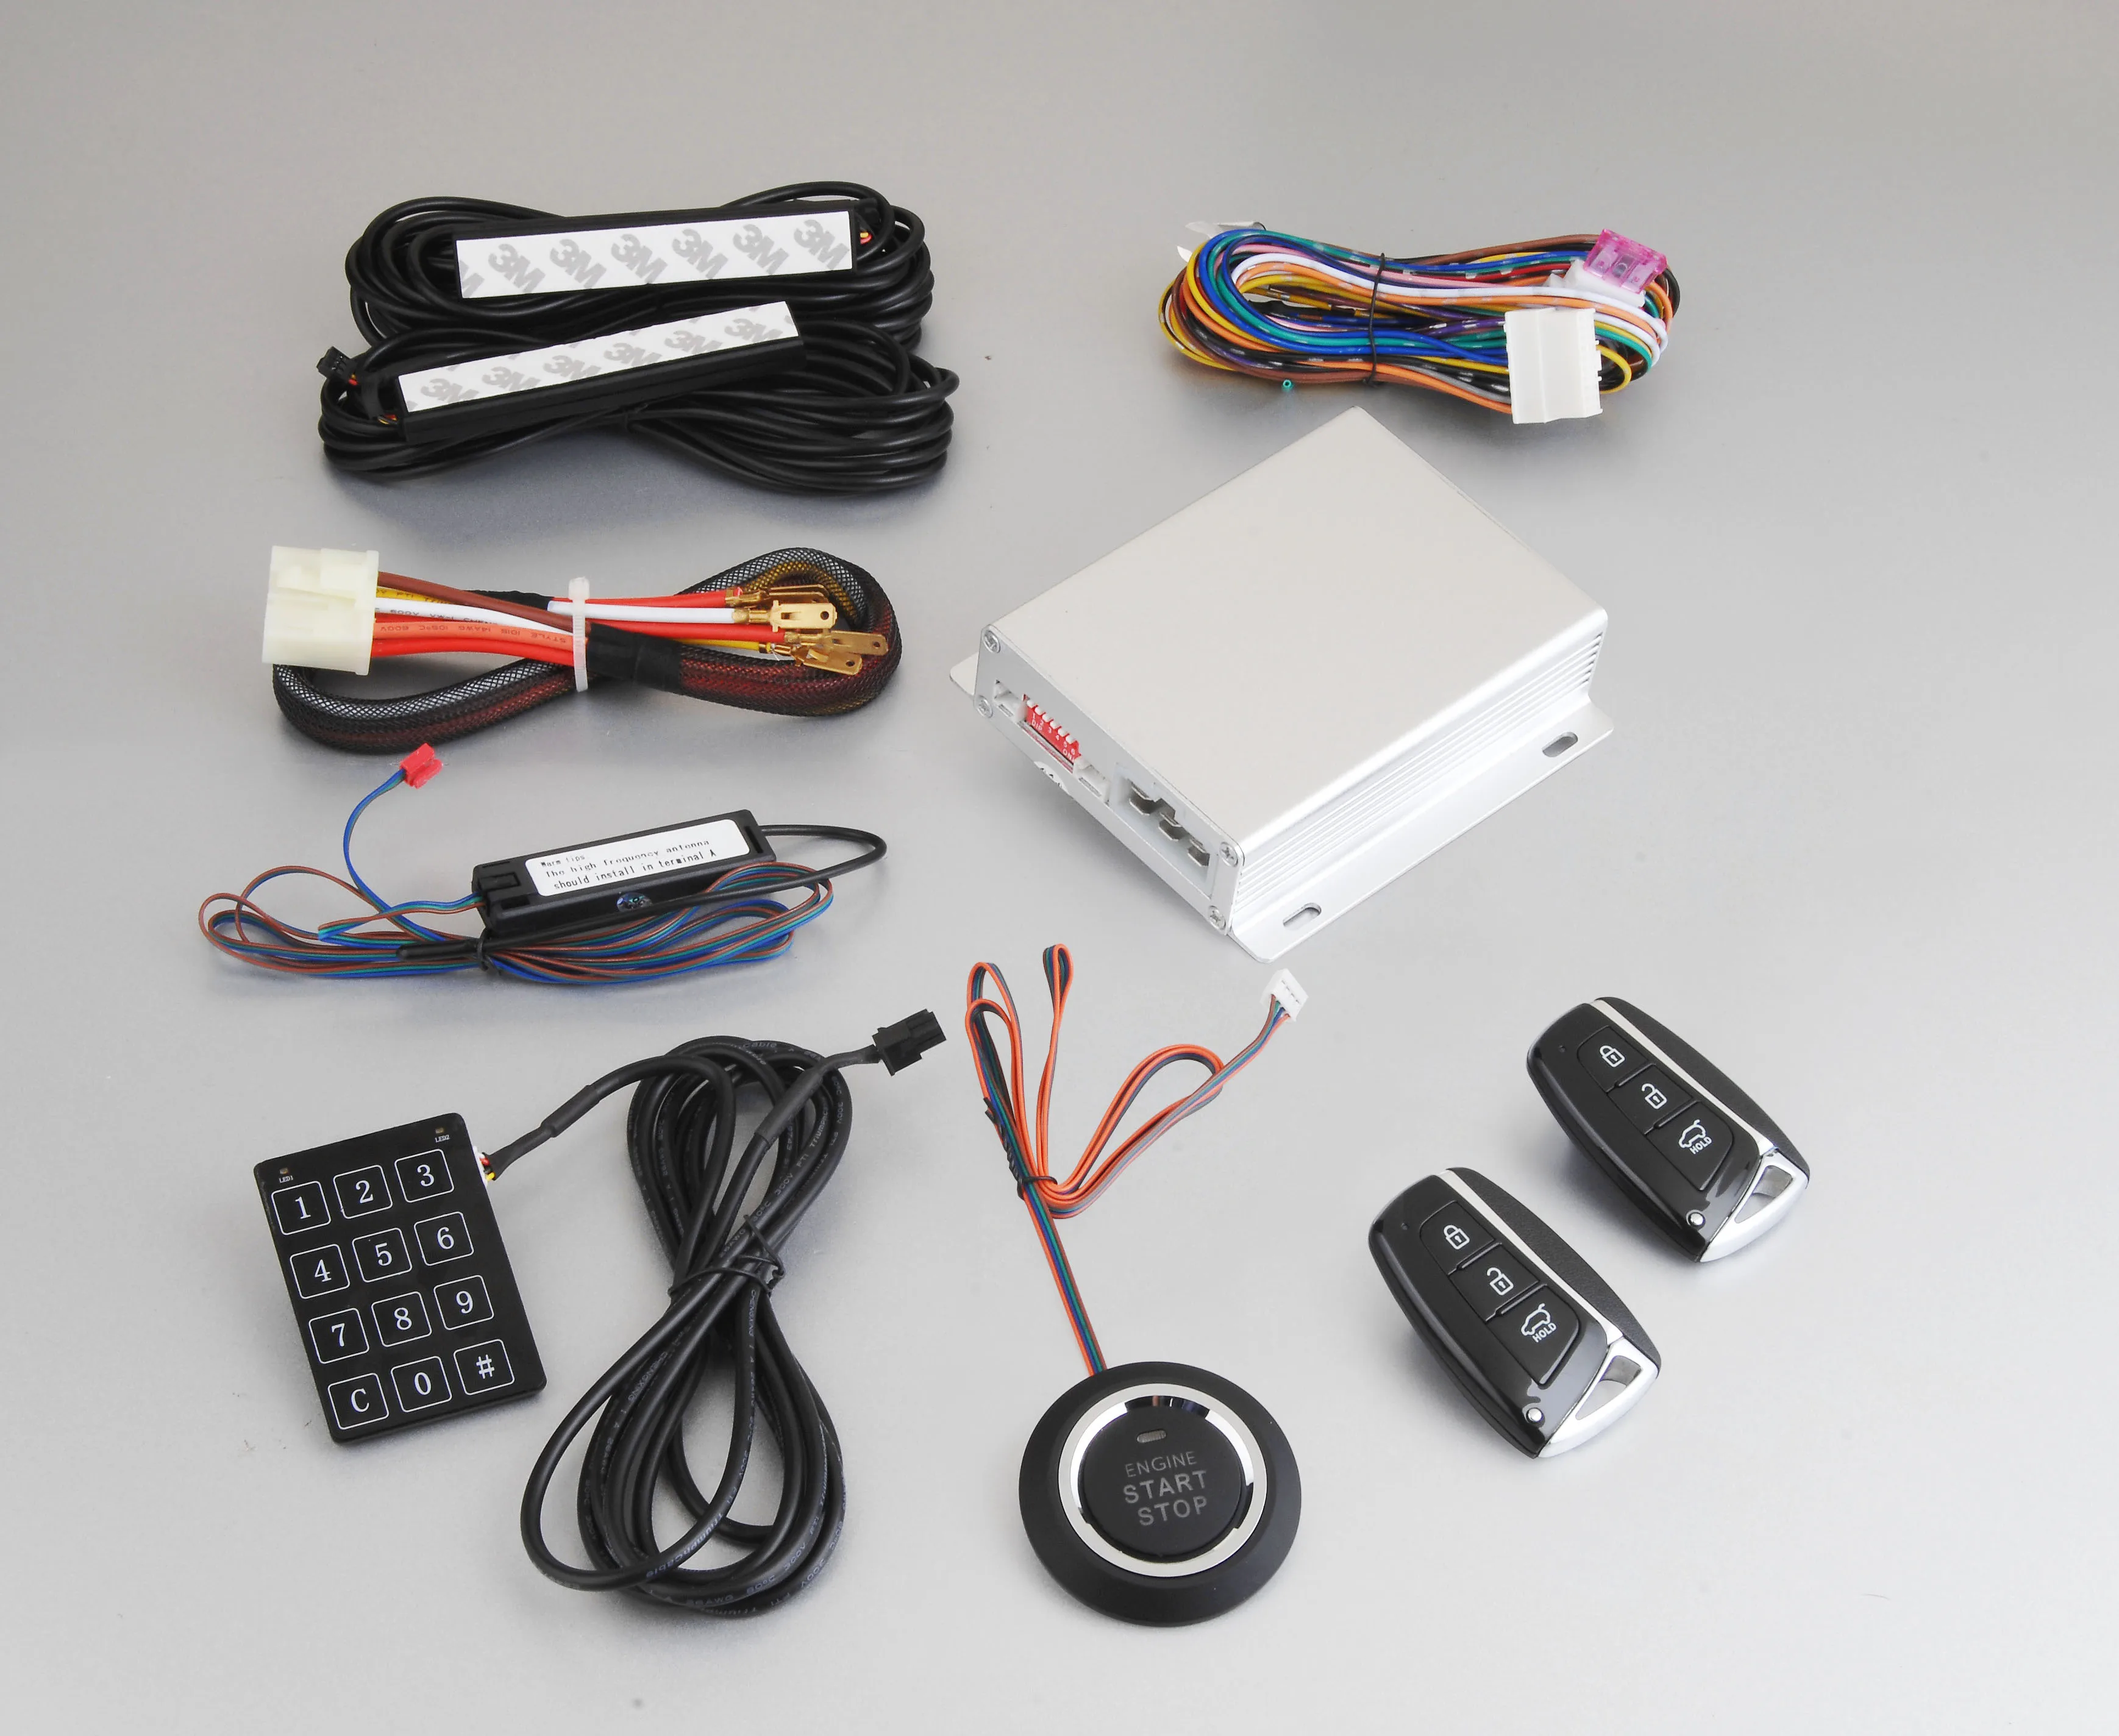 Button universal Car alarm pke passive keyless entry system remote control auto start PKE engine start and stop system